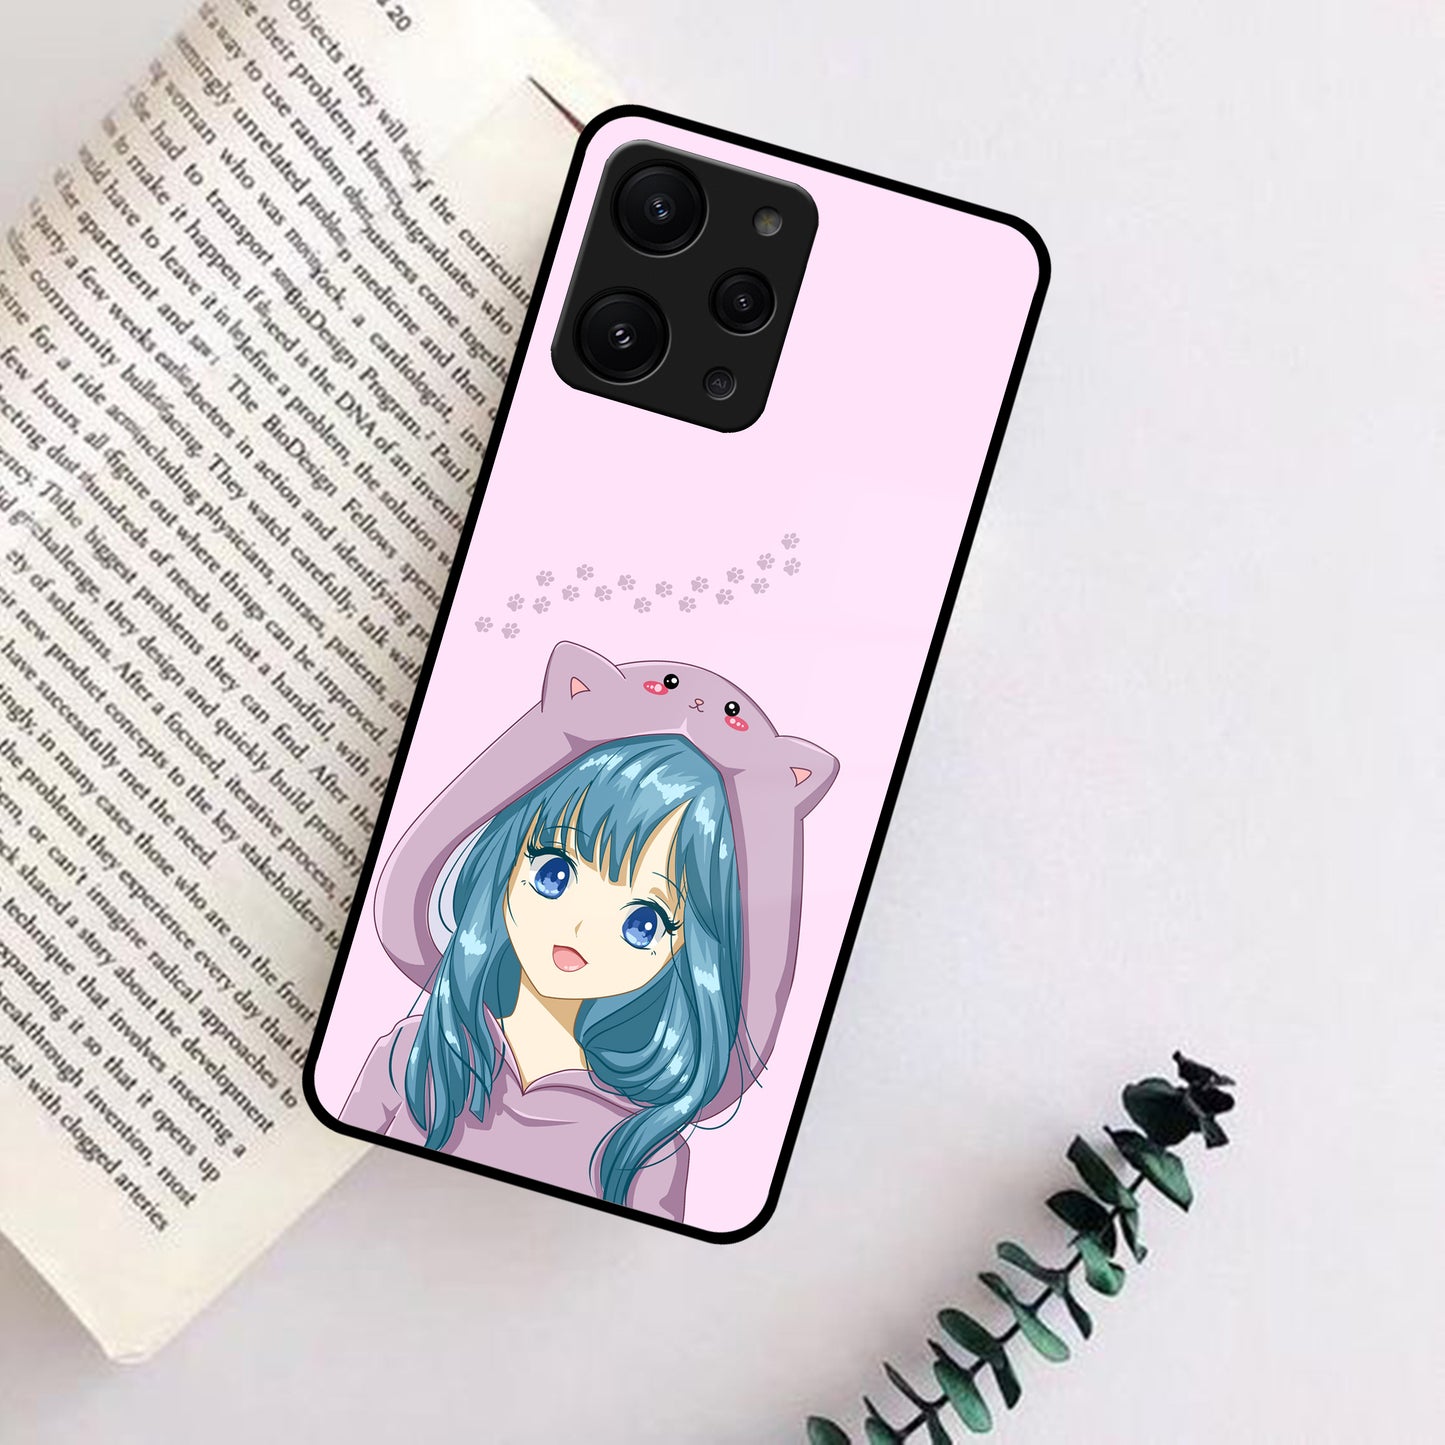 Purple Aesthetic Girl With Cat Phone Glass Case Cover For Redmi/Xiaomi